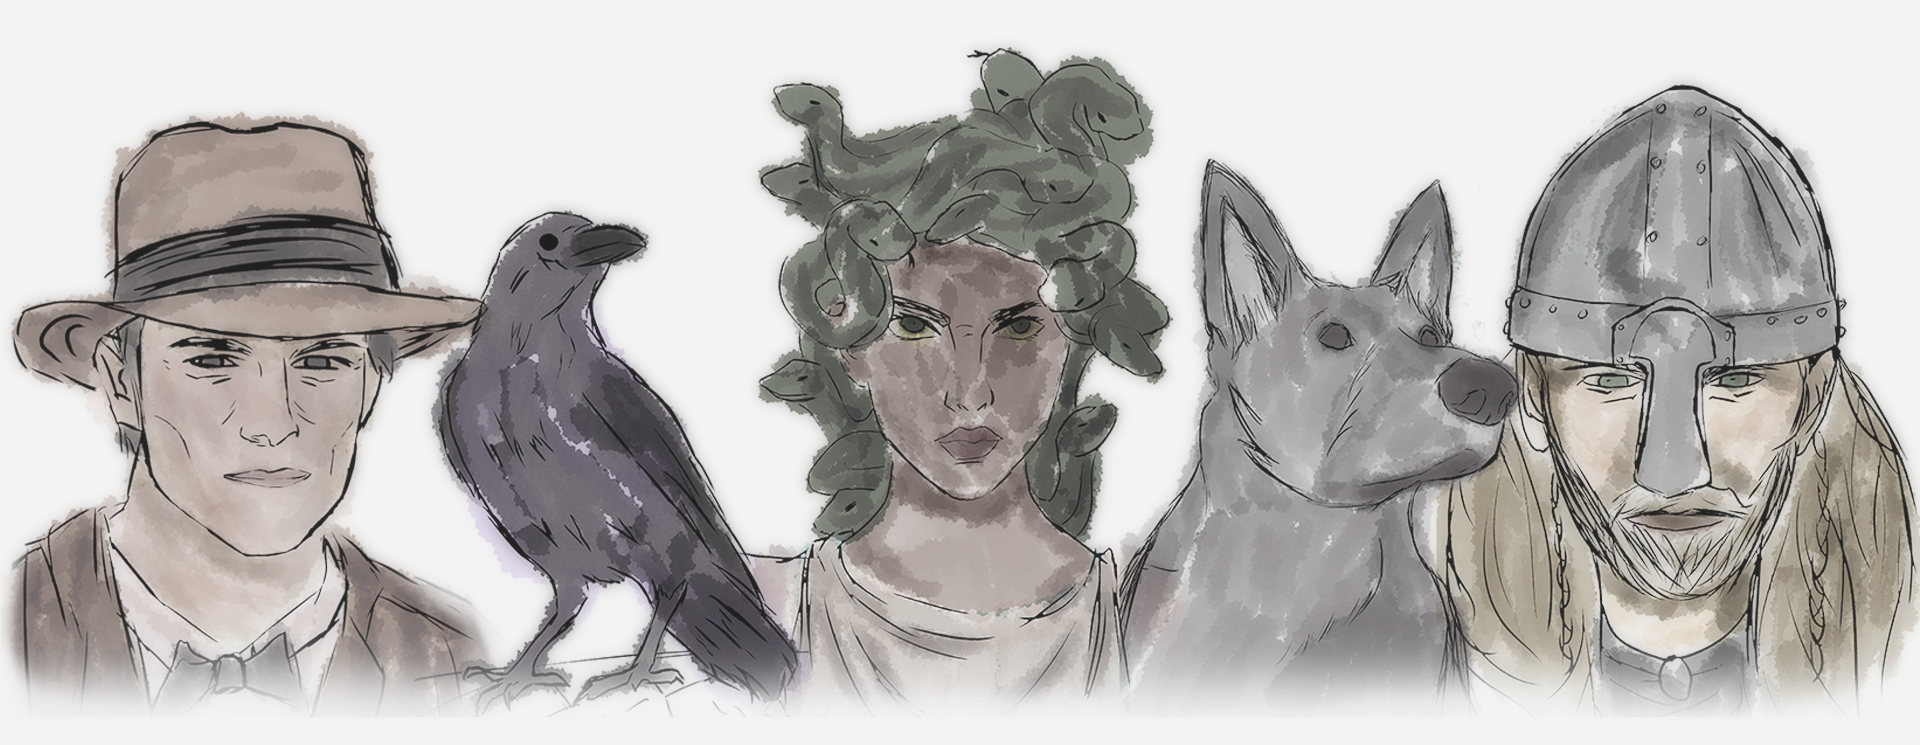 Digital watercolor of an archaeologist, crow, Medusa, a German shepherd, and a Viking.